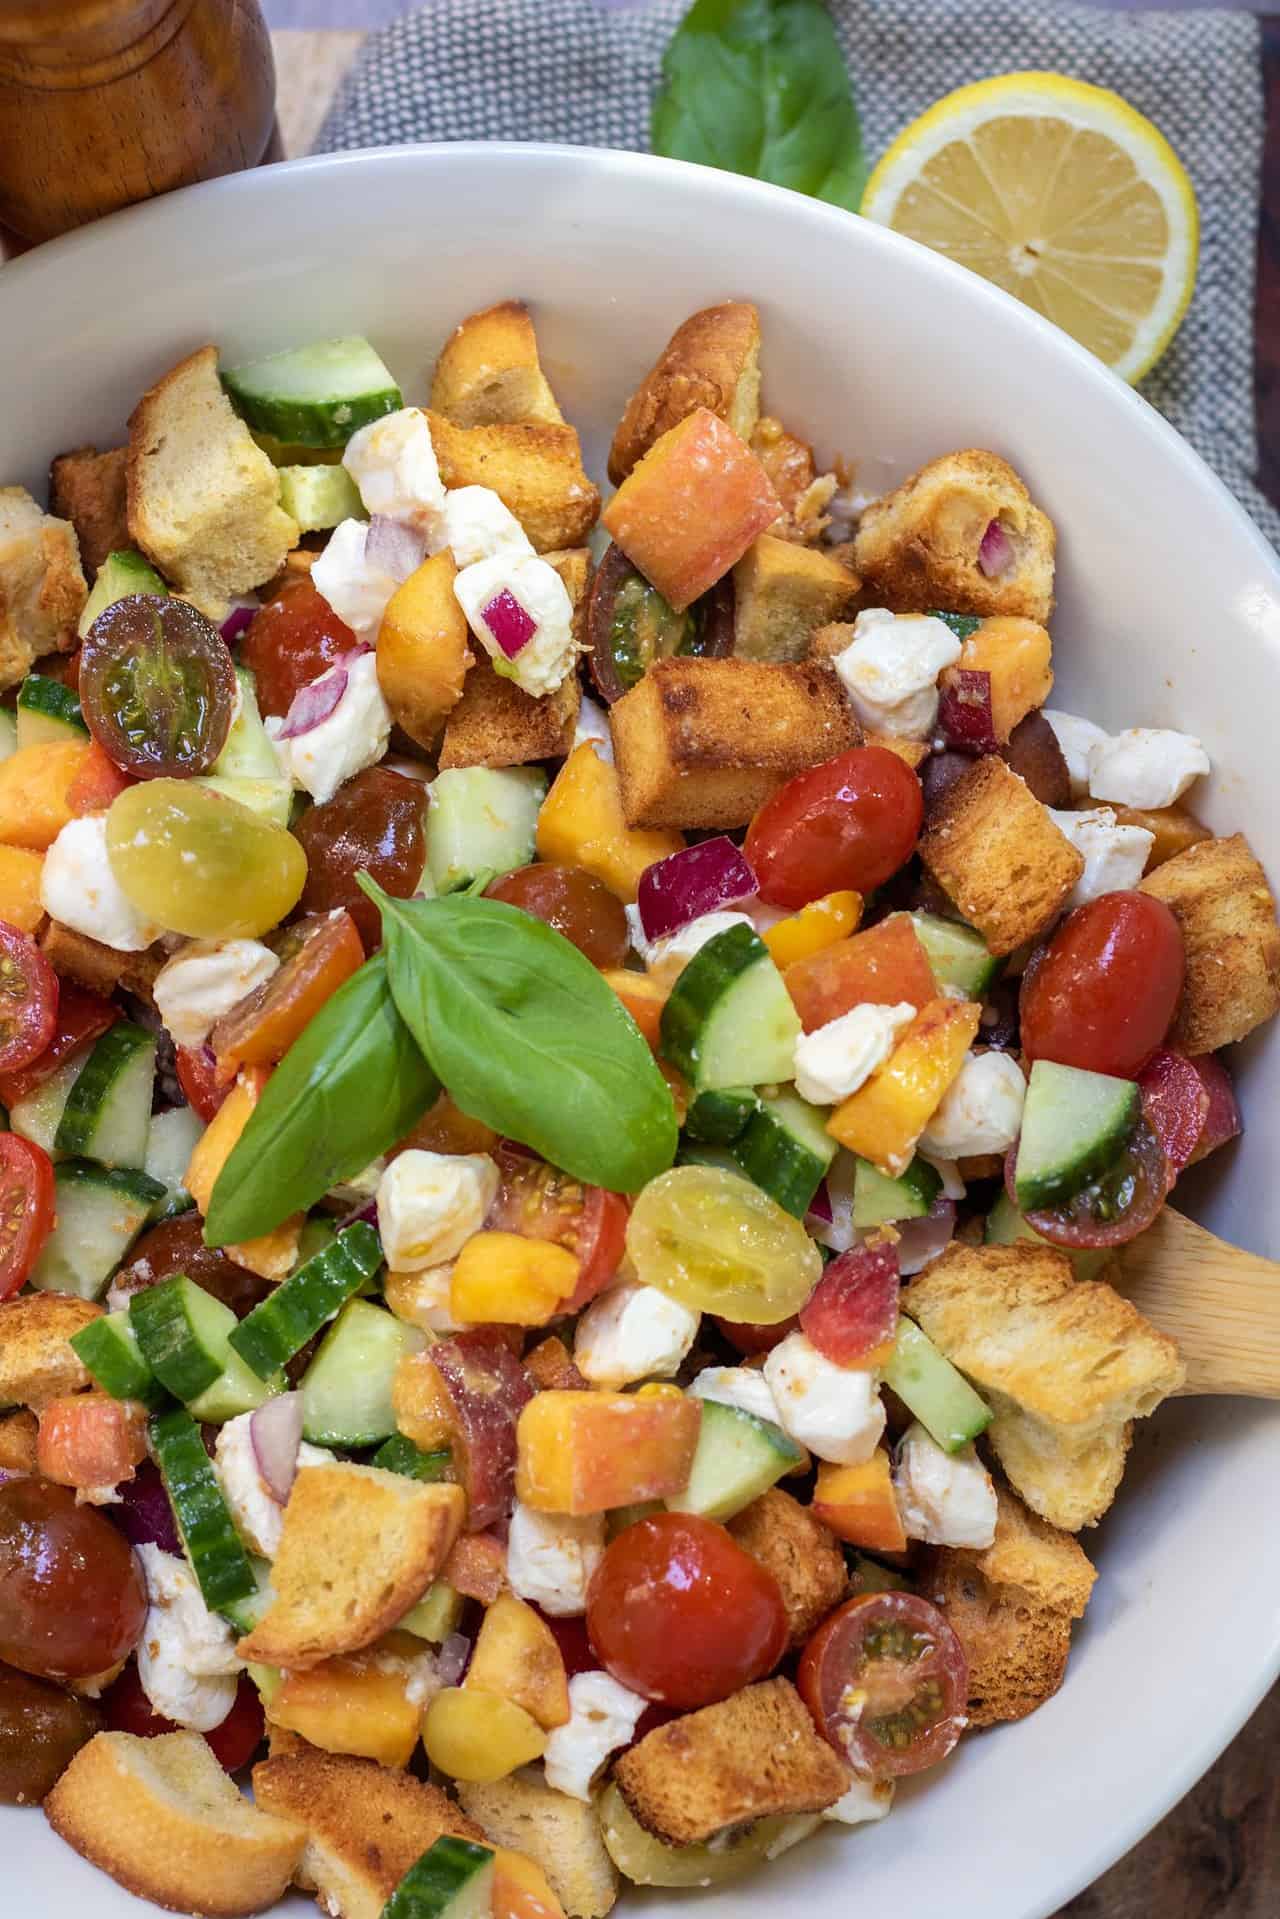 A large white bowl with chunks of golden crispy bread, cherry tomatoes, cucumbers, red onion slices, fresh basil, mozzarella and peaches.